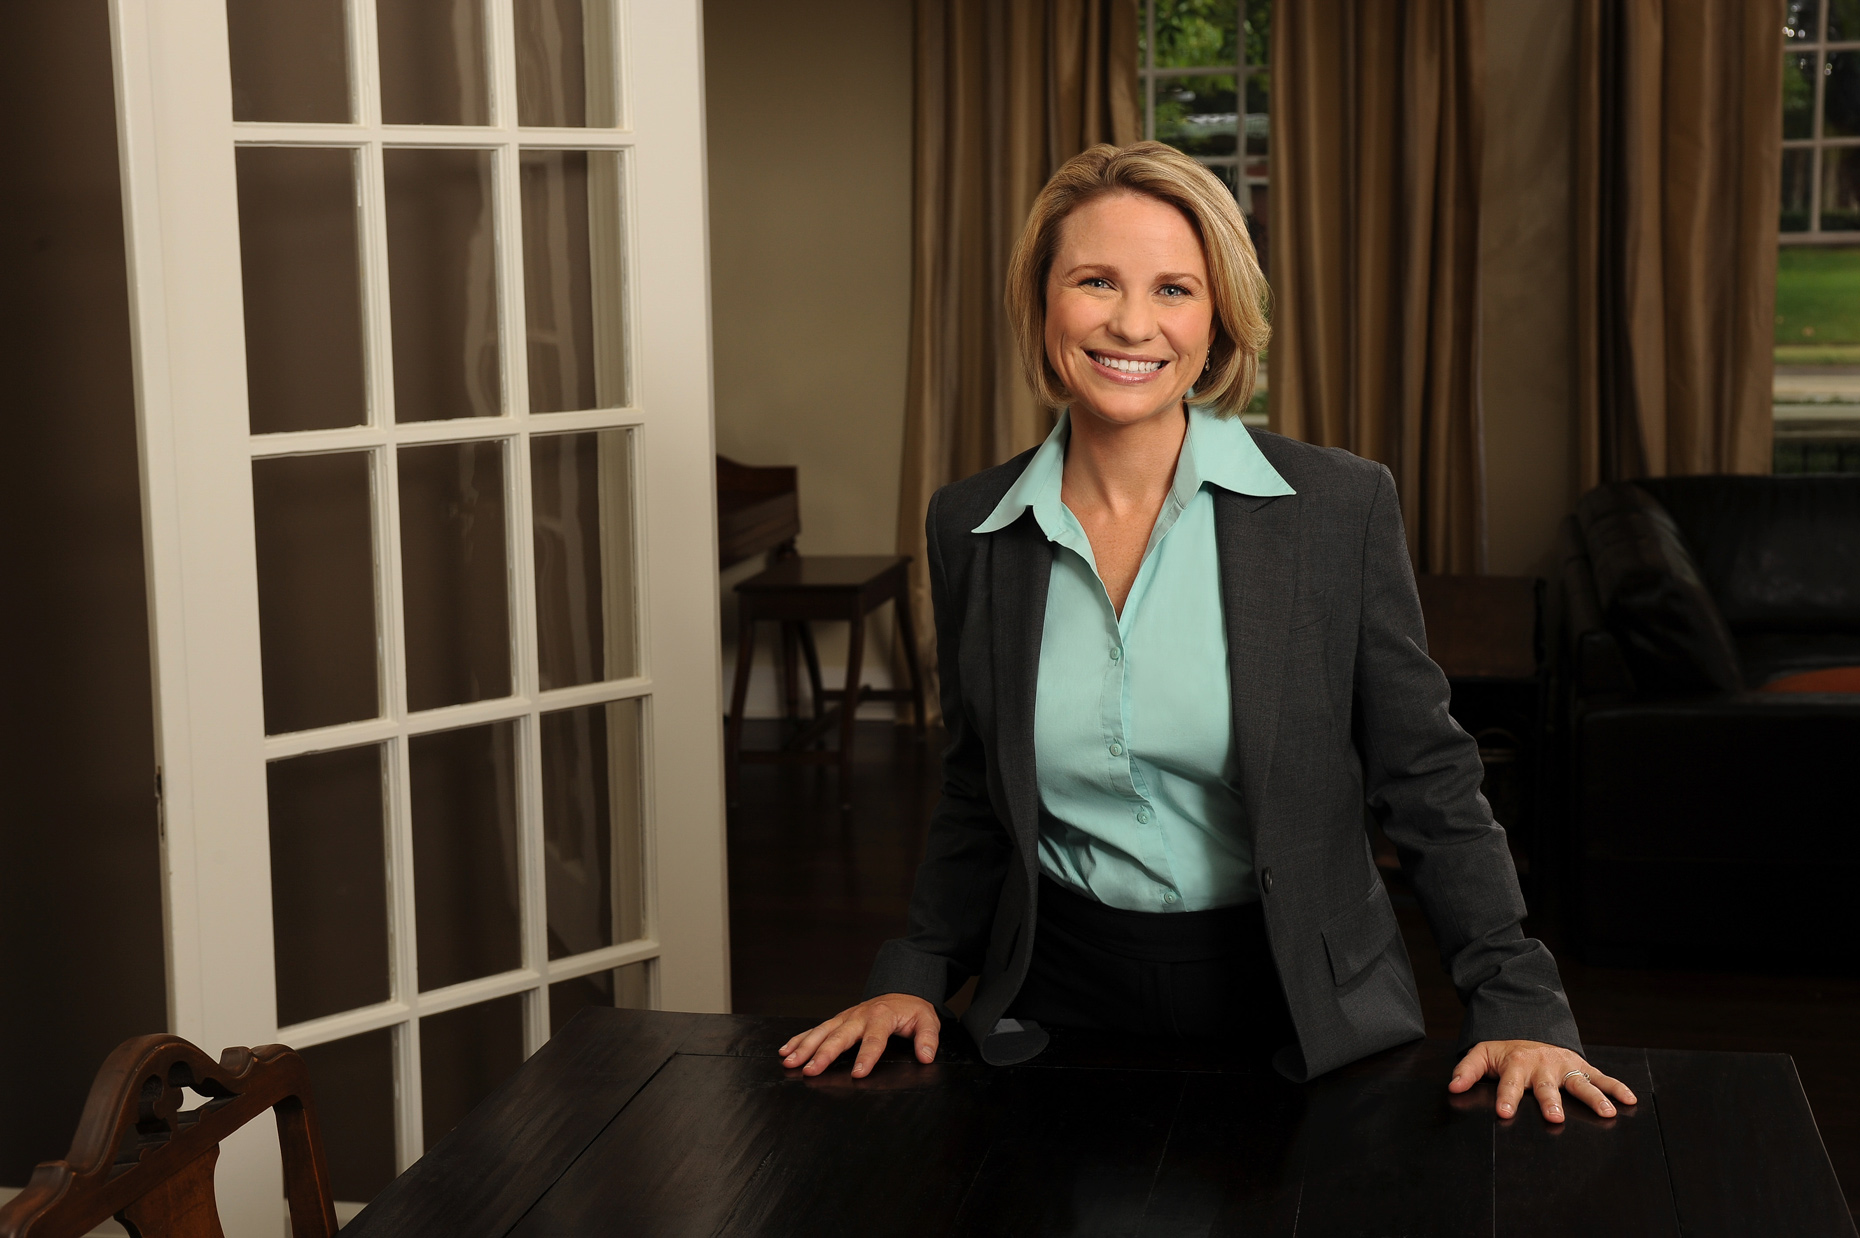 Business portrait photography in Dallas by Kevin Brown.